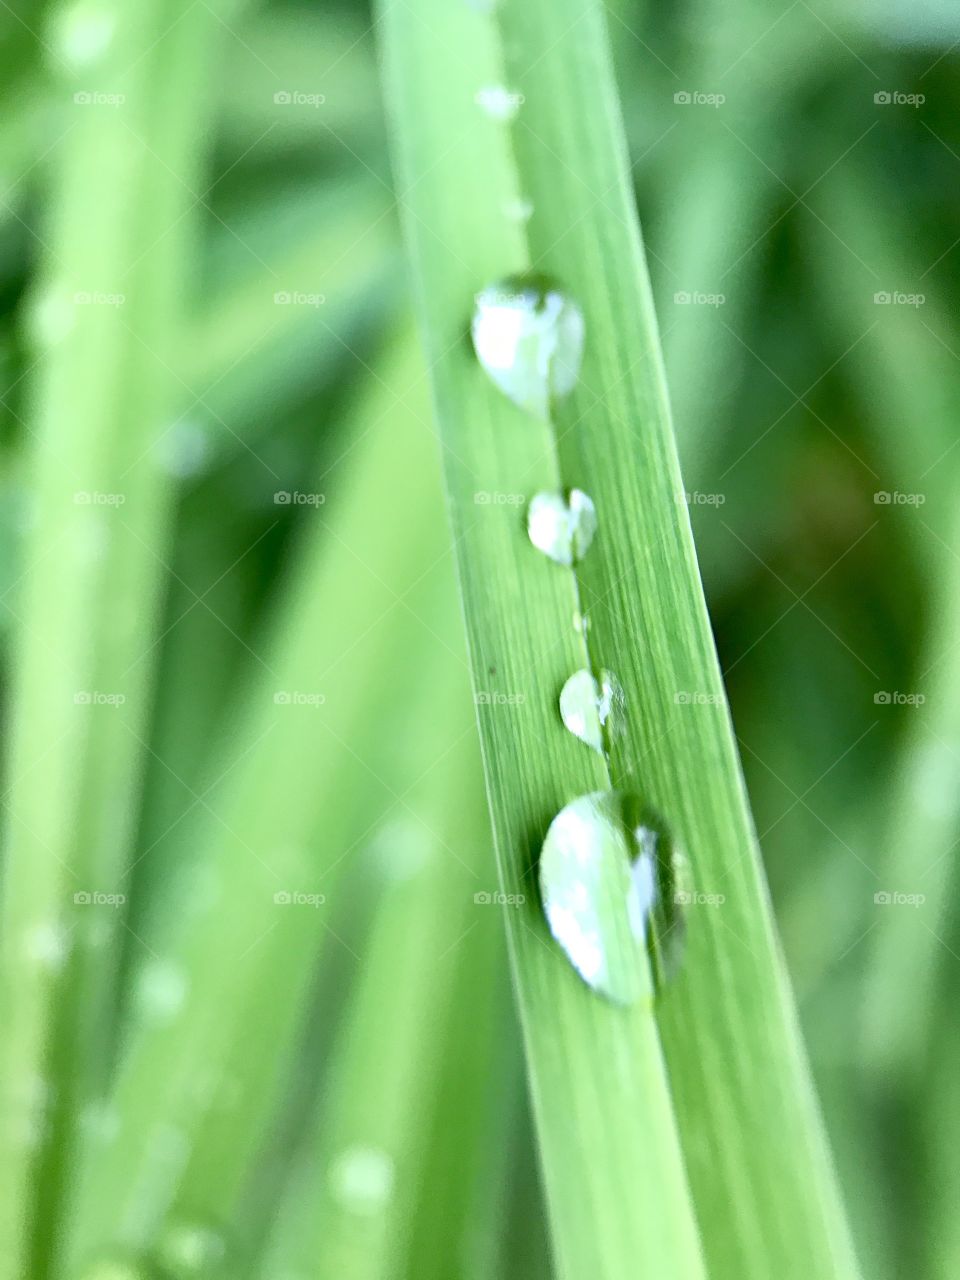 4 Raindrops on a Leaf ...
Mother Nature is always so perfect. These raindrops are perfectly spaced apart and in sequence as they perch themselves on this leaf after the rain .
In perfect sequence of Big-small-big-small... It's a beautiful thing 